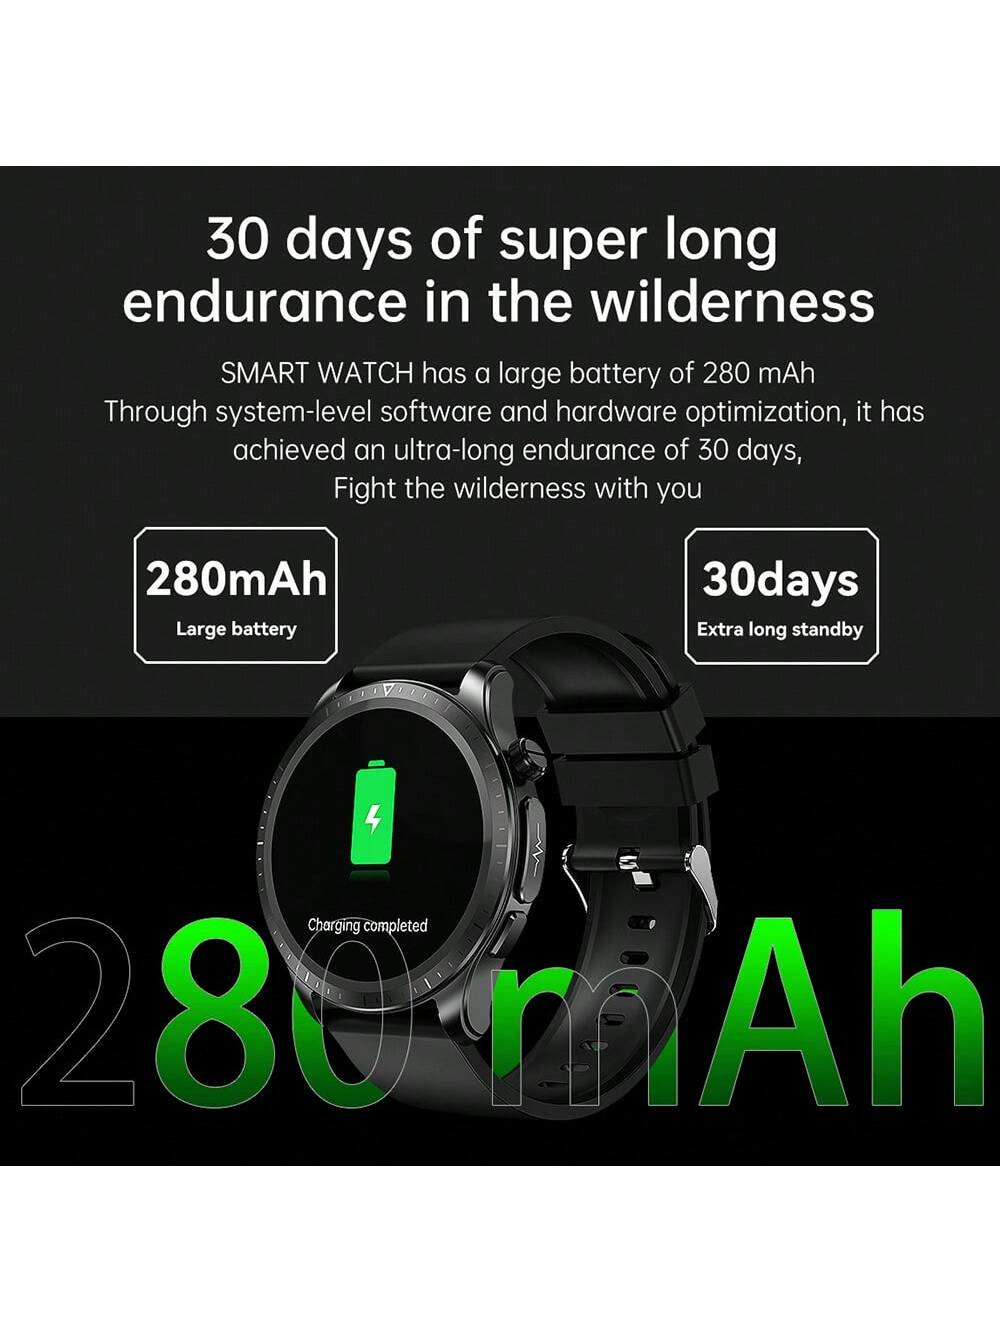 Smartwatch, 1.39-inch 360*360 Hd Touch Screen Smartwatch With Chest Strap For Real-time Ecg Analysis